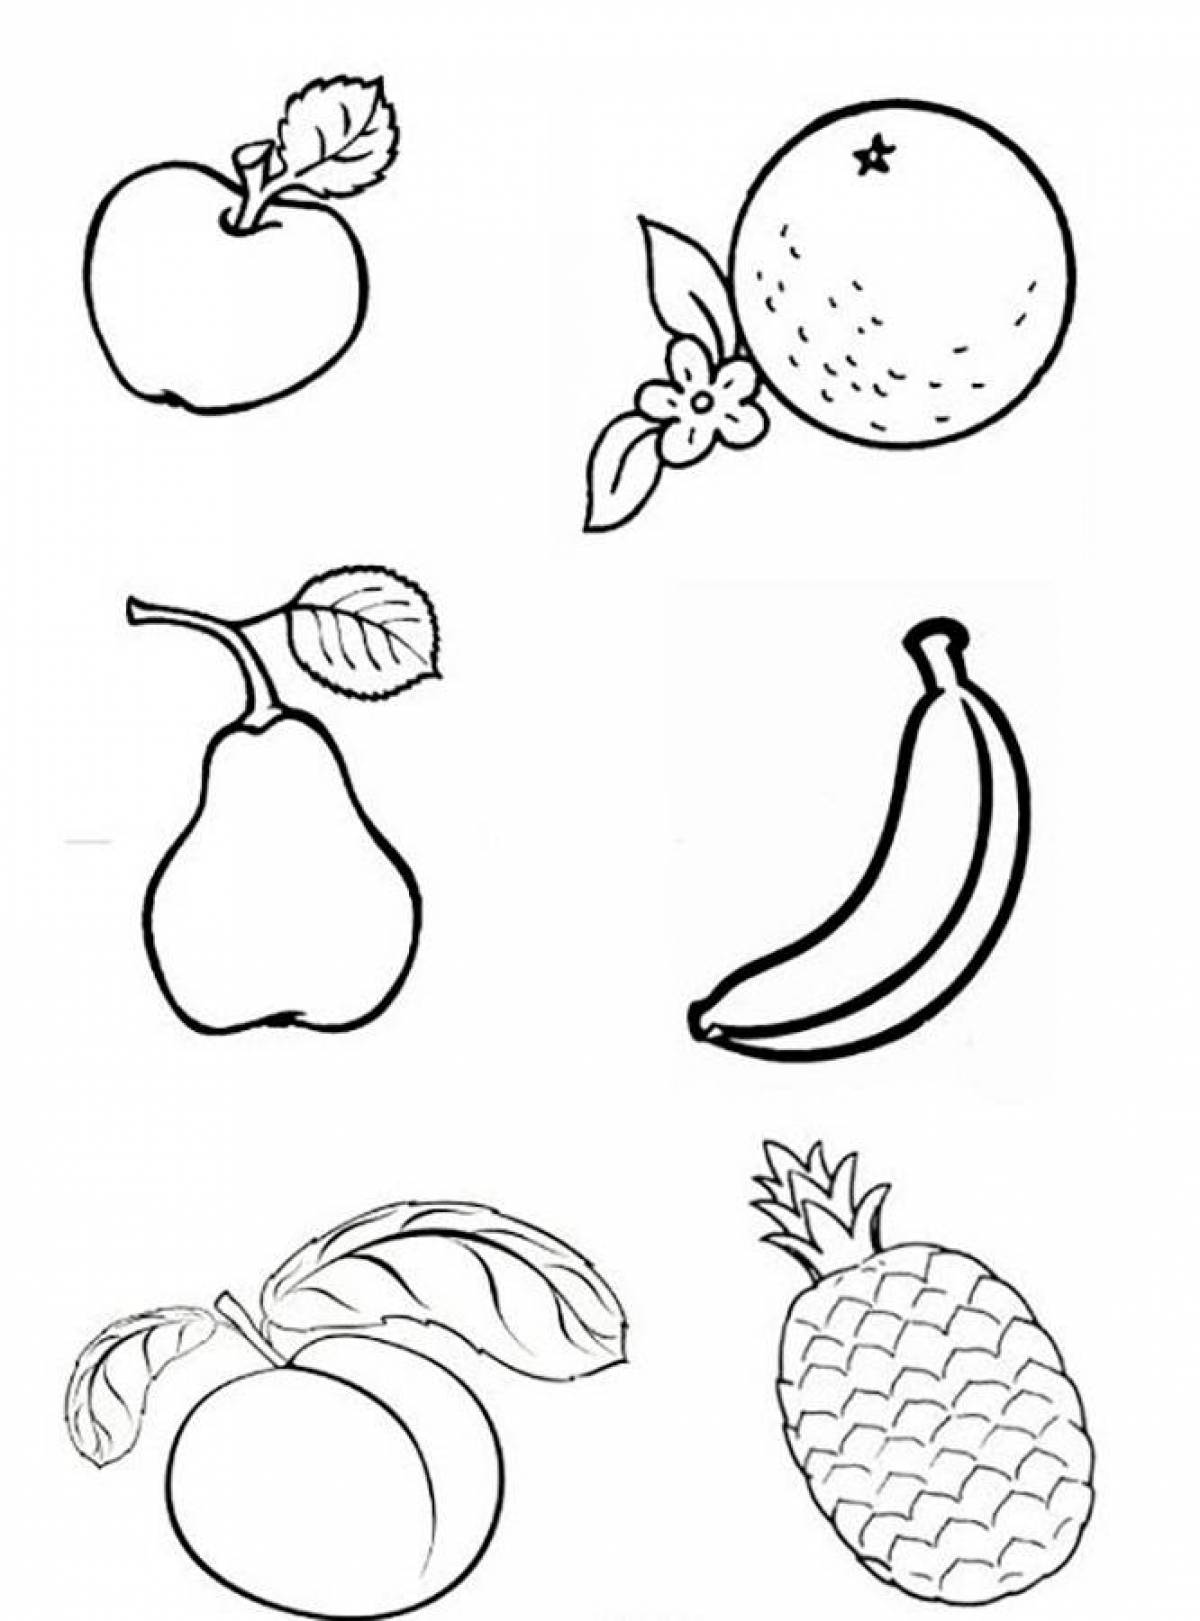 Interesting fruit coloring pages for kids